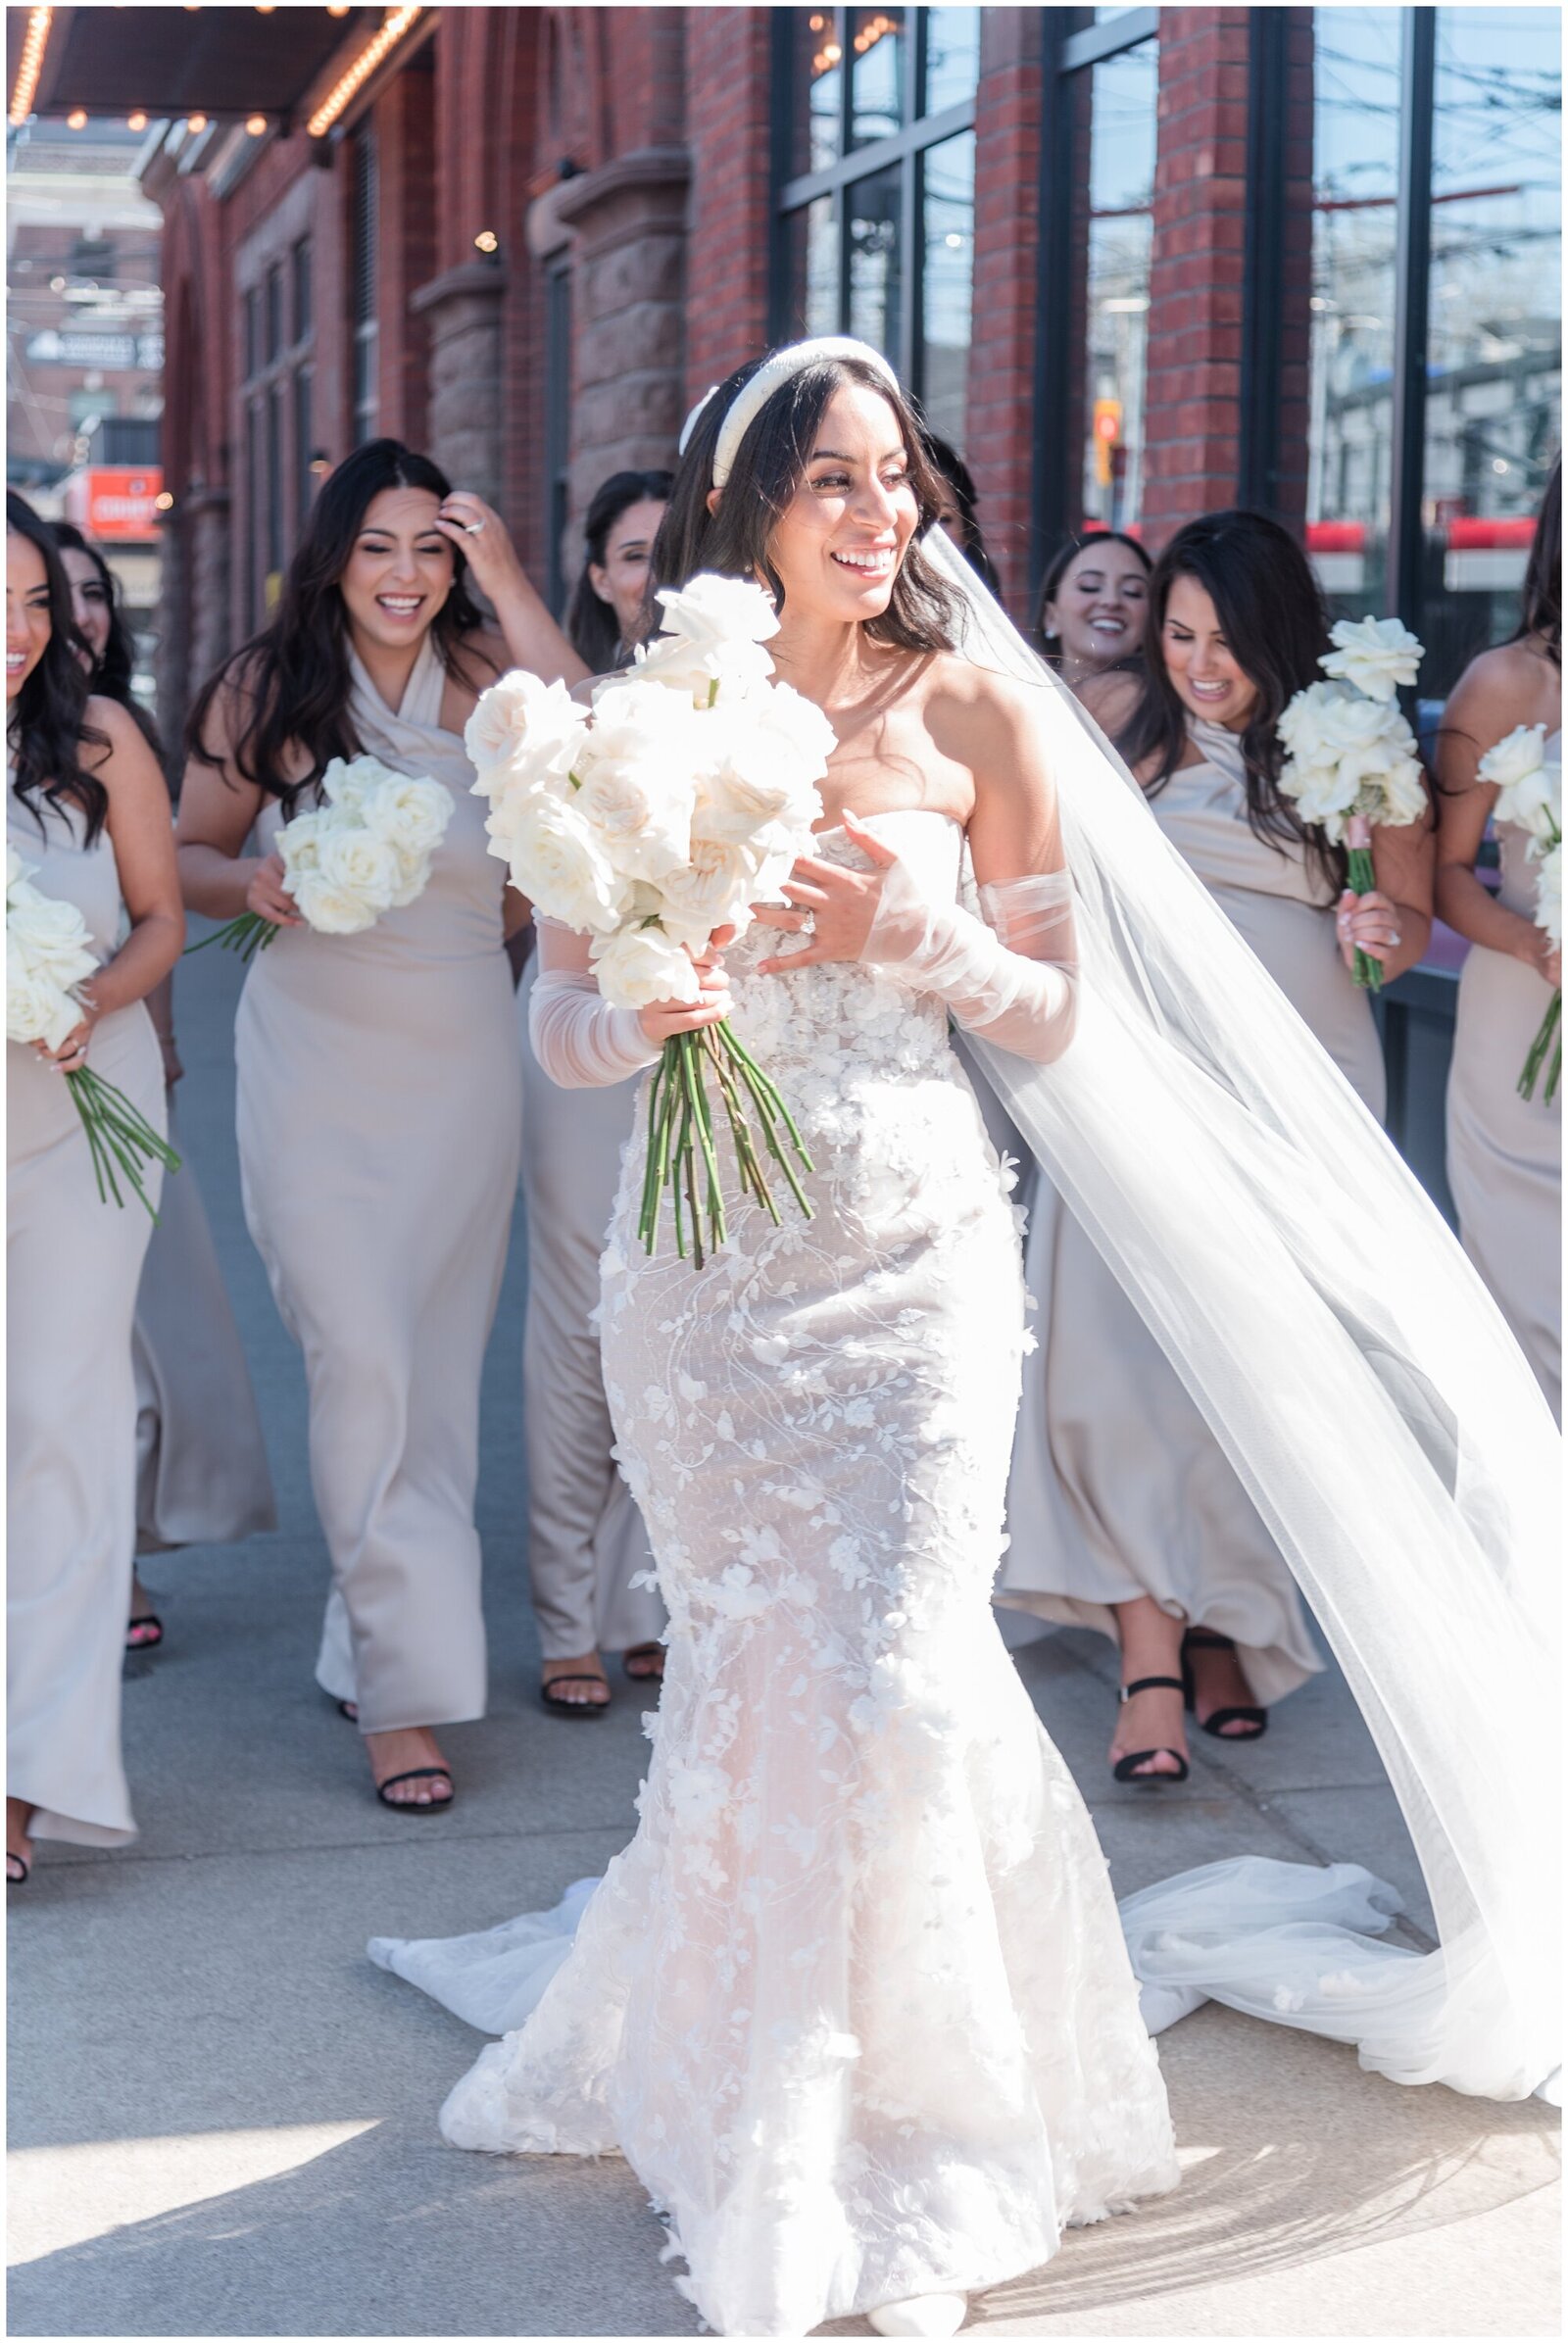 Bride with her bridesmaids and white roses bouquets on Toronto streets - The bride wears a headband with her long hair down matching with her sheer detachable sleeves and sheath silhouette dress with floral bridal lace